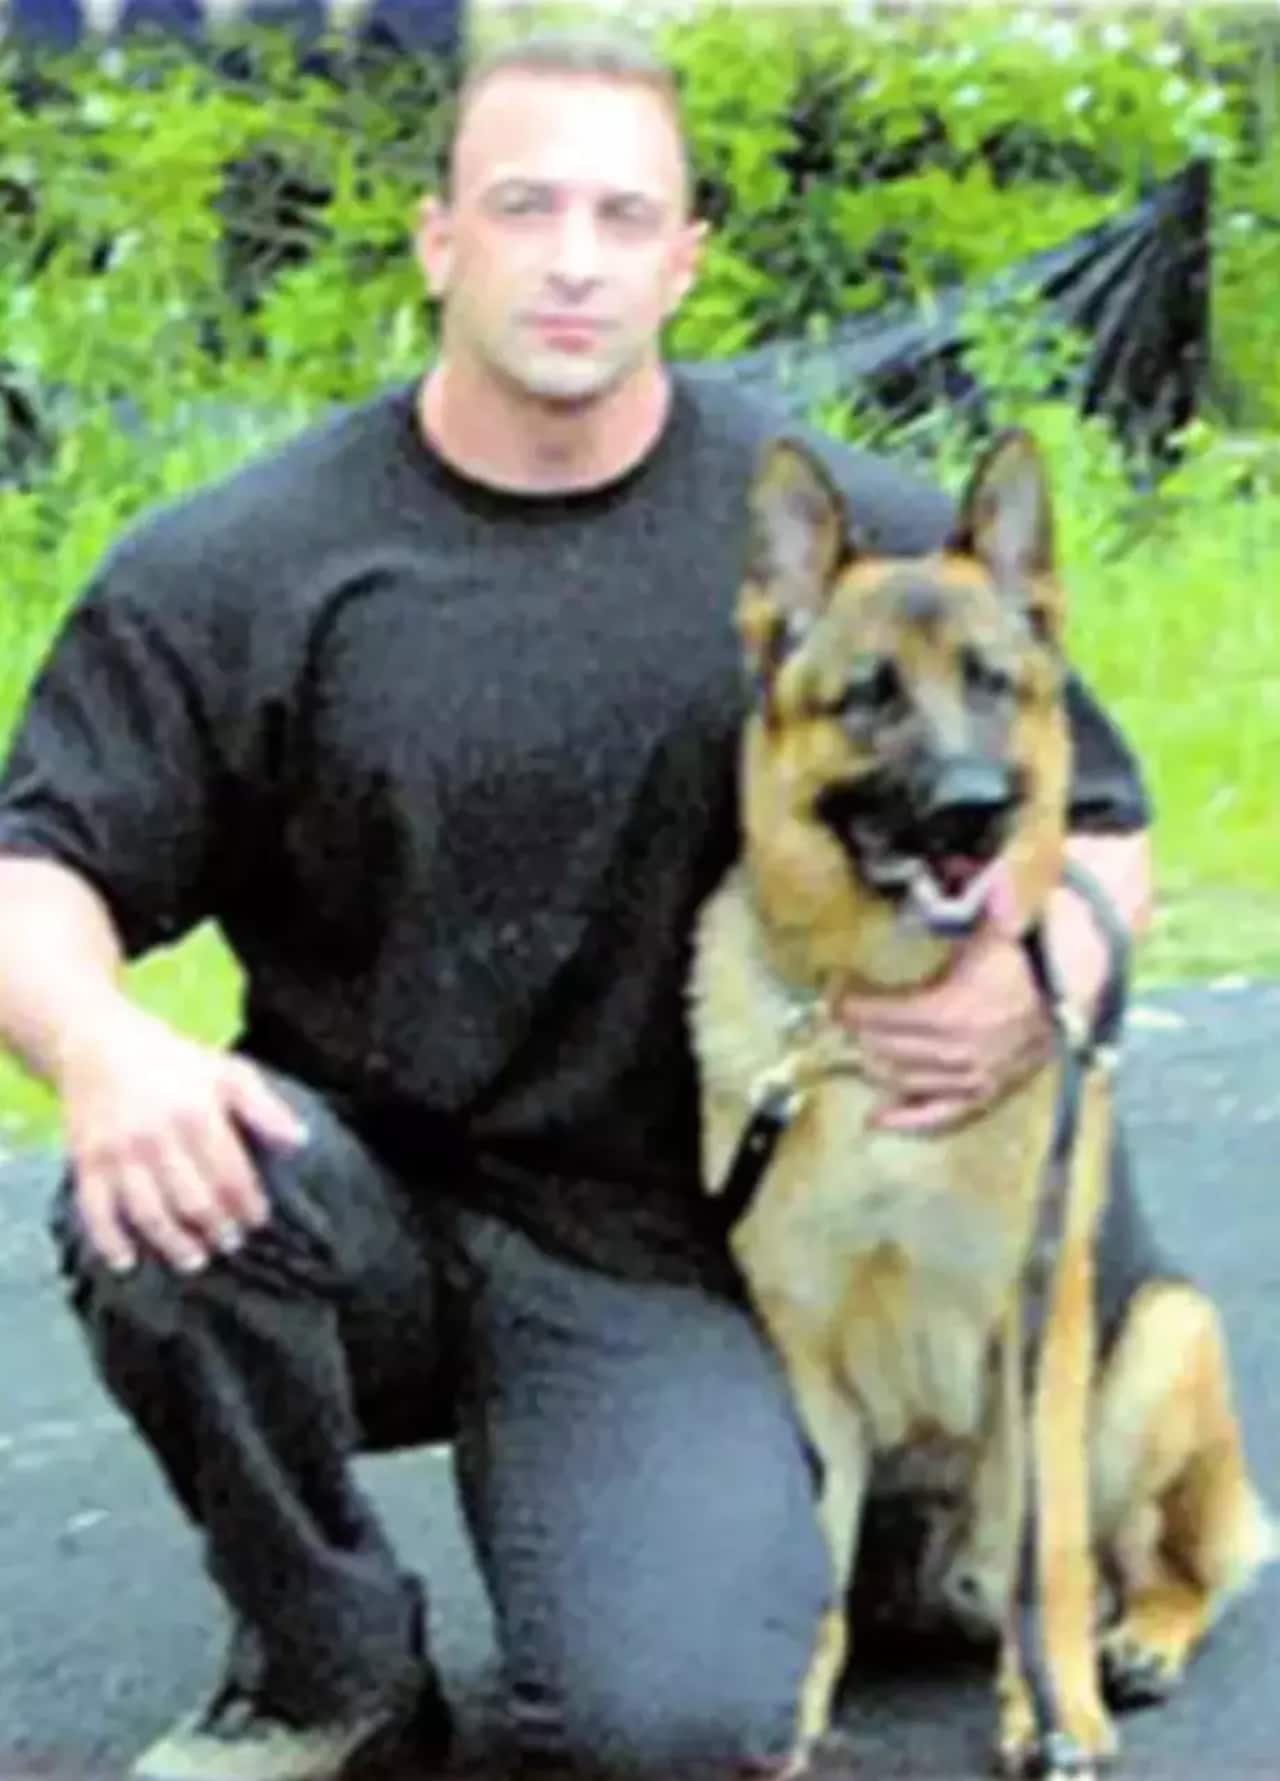 Nicholas Tartaglione with a K-9 officer in 2007 when Tartaglione was a member of the Briarcliff Manor Police Department.